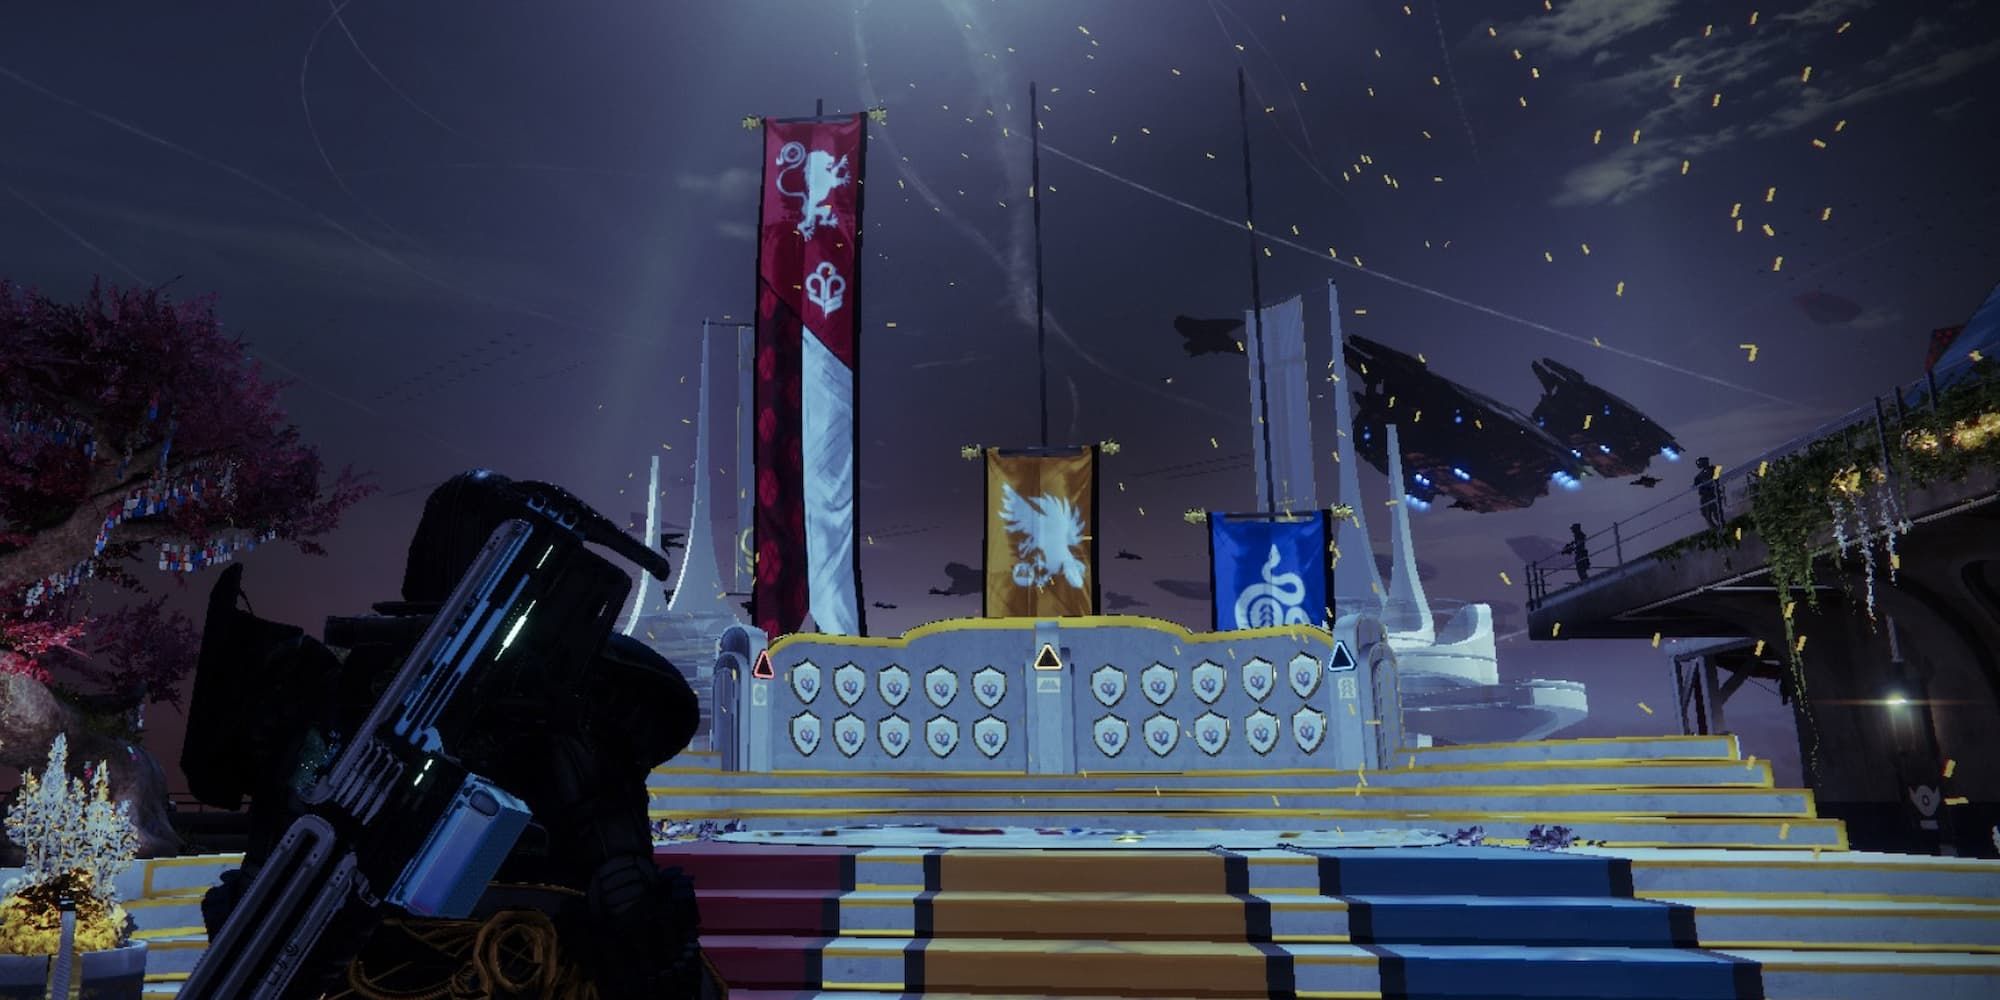 The podium at the Tower during Destiny 2's Guardian Games event